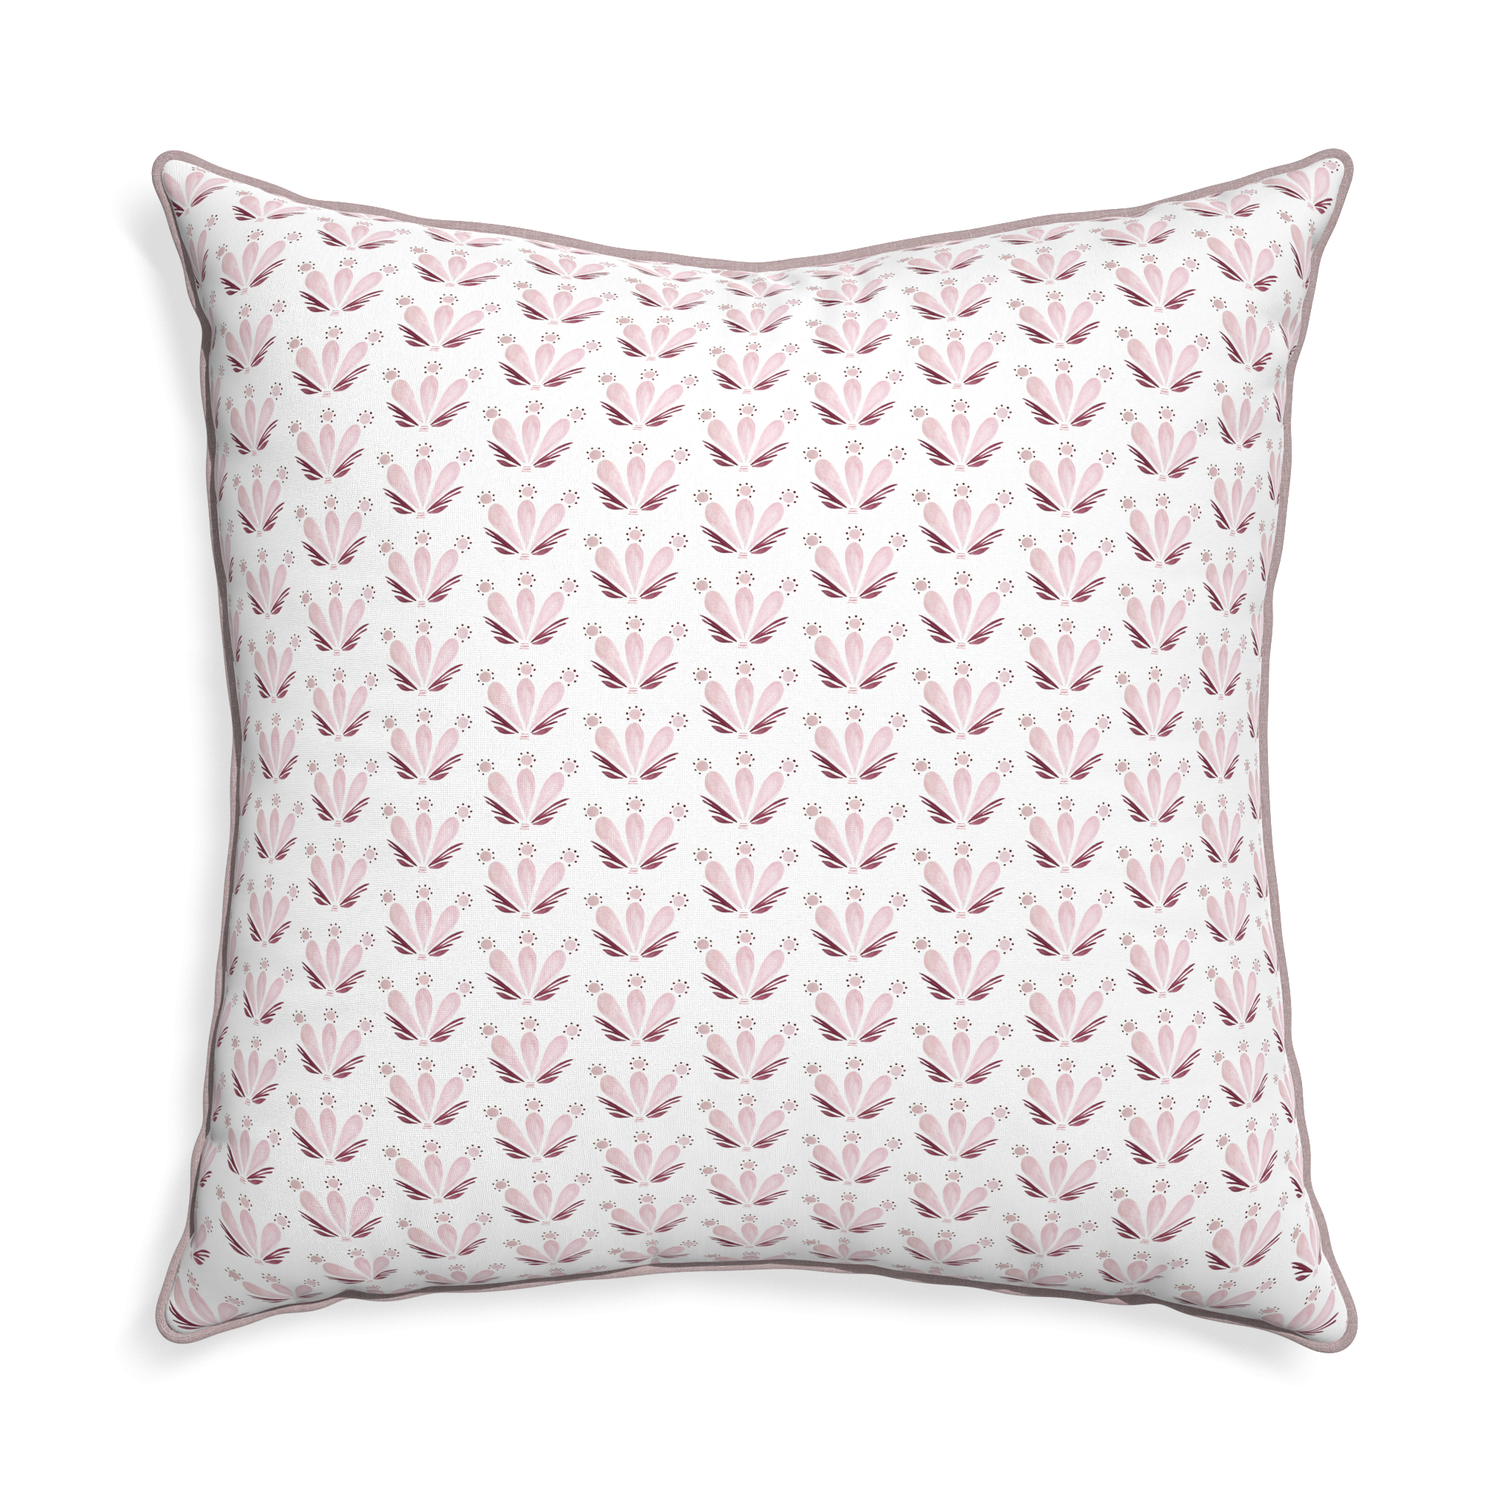 Euro-sham serena pink custom pink & burgundy drop repeat floralpillow with orchid piping on white background